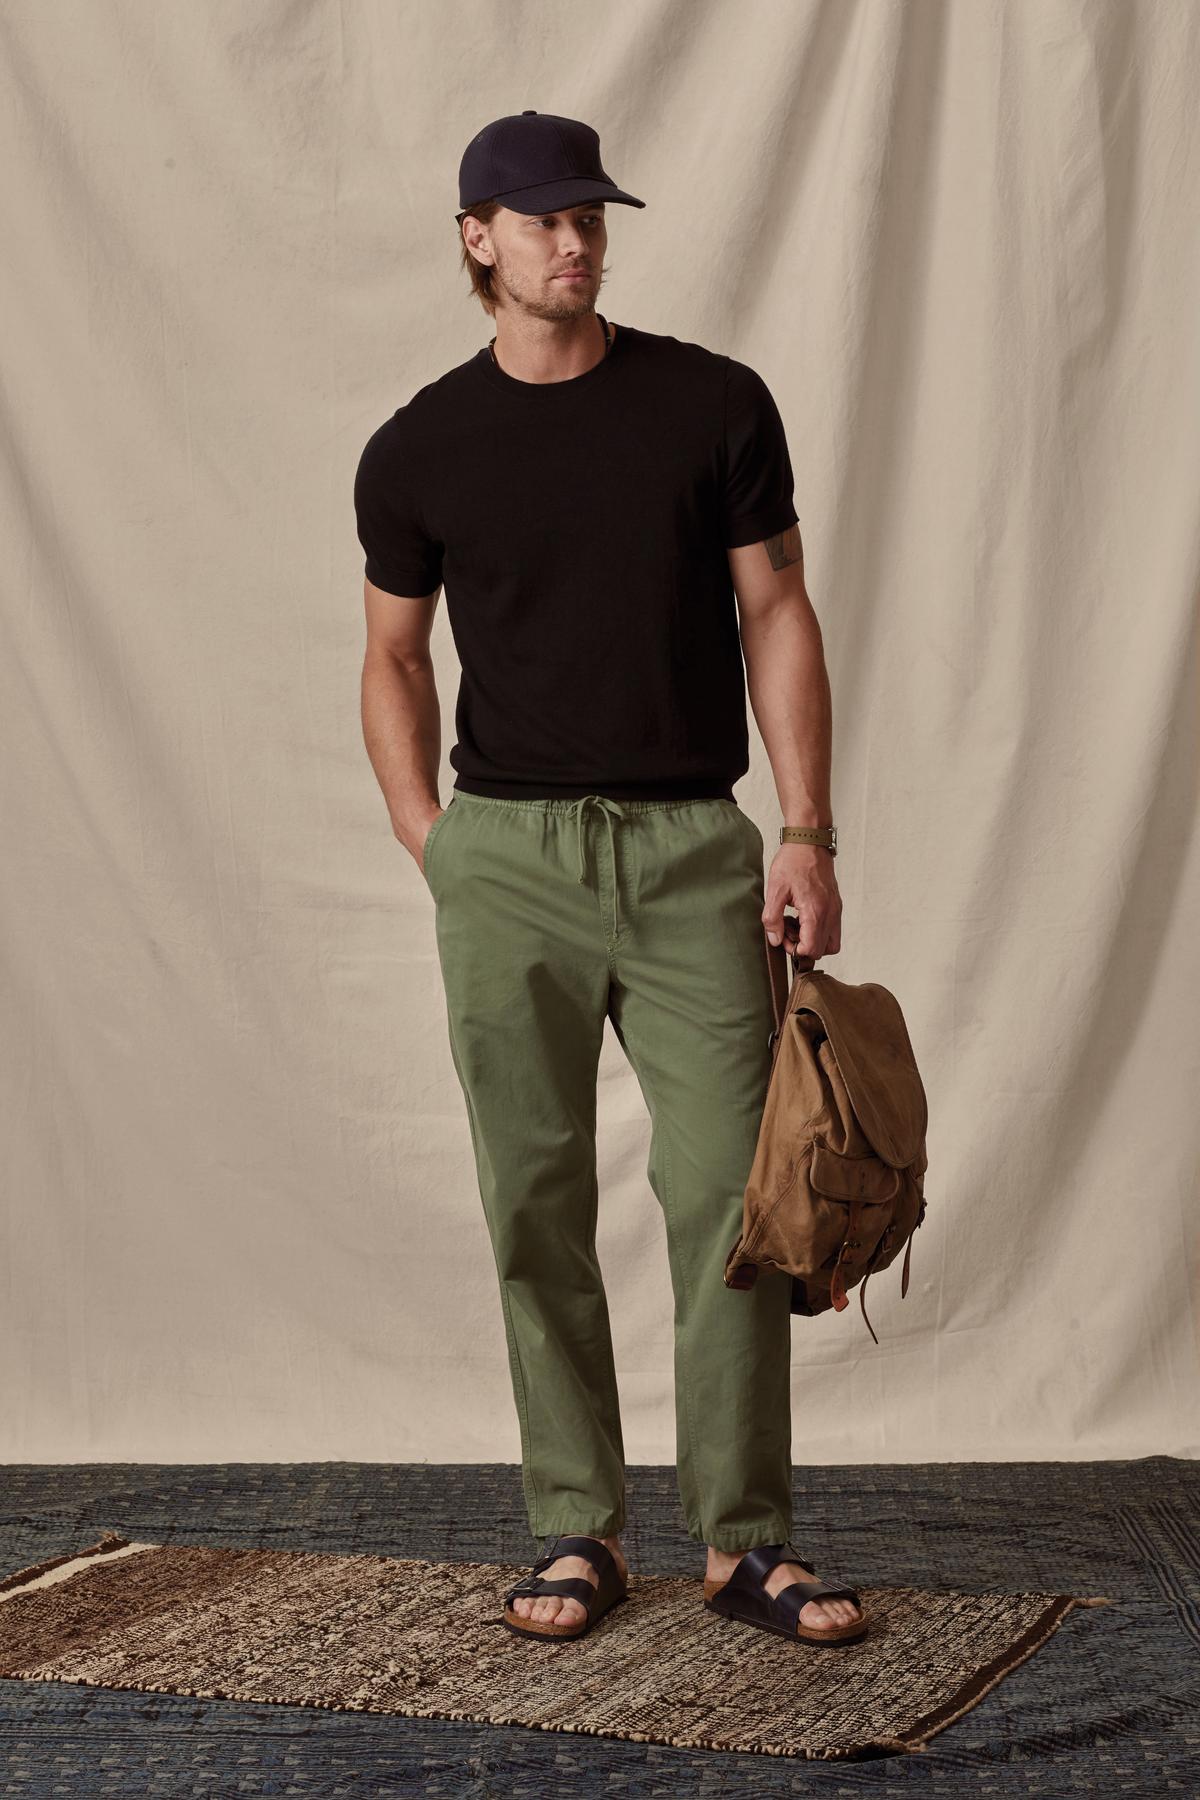   A man in a black t-shirt, green pants, and sandals, wearing a cap and holding a backpack, stands on a Velvet by Graham & Spencer rug against a draped cotton/linen blend canvas background. 